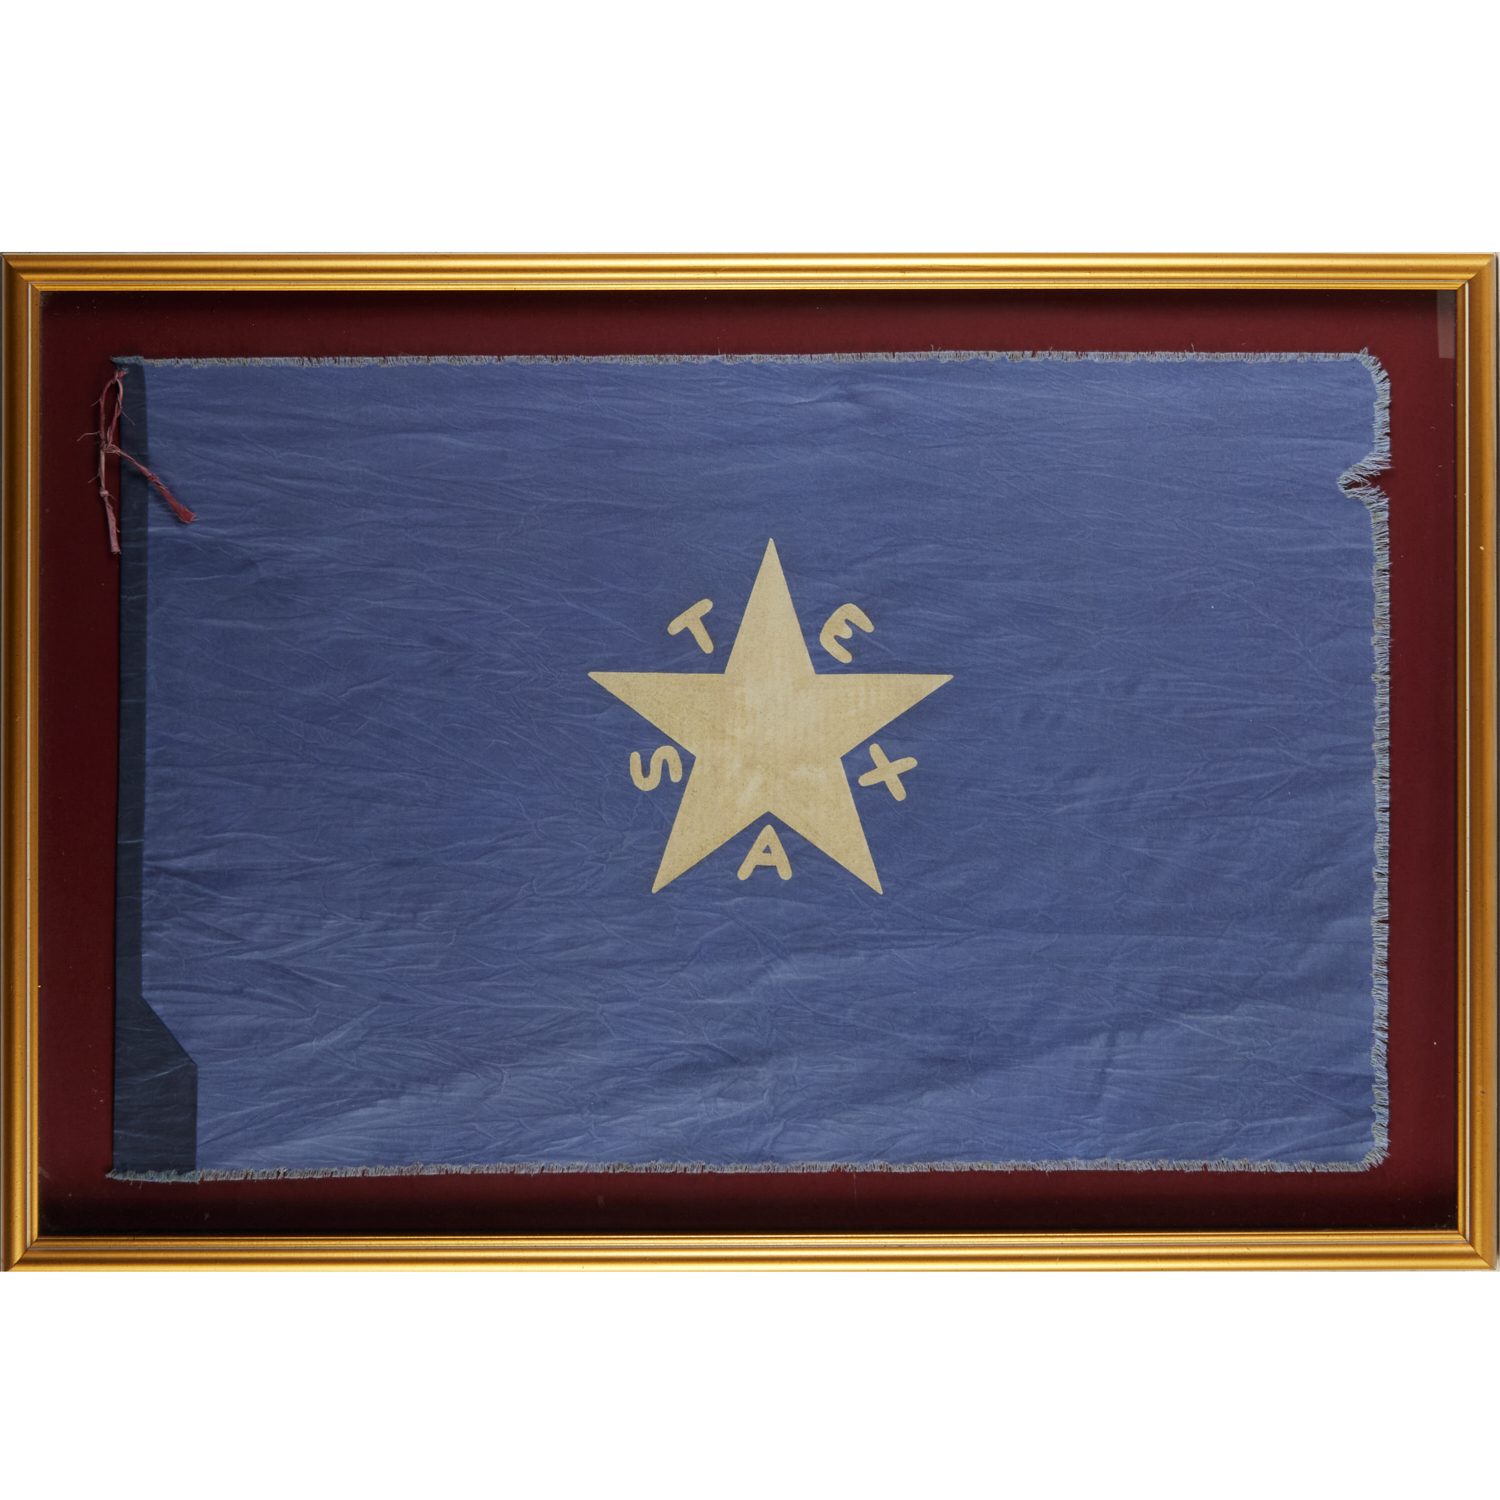 LARGE FRAMED TEXAS FIRST FLAG OF 360981